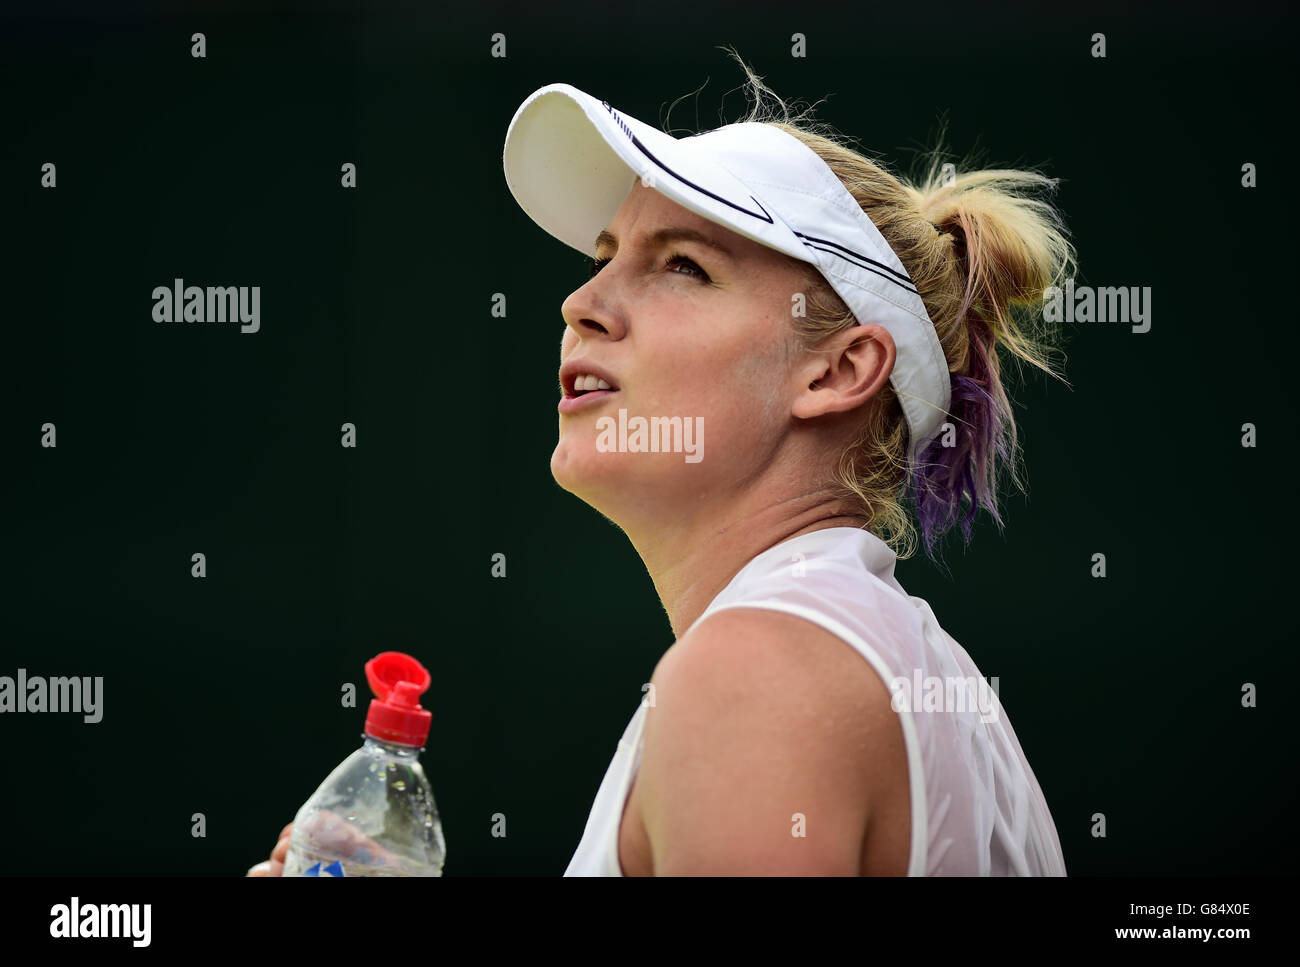 Bethanie Mattek-Sands cools off during her match against Belinda Bencic on day Five of the Wimbledon Championships at the All England Lawn Tennis and Croquet Club, Wimbledon. Stock Photo